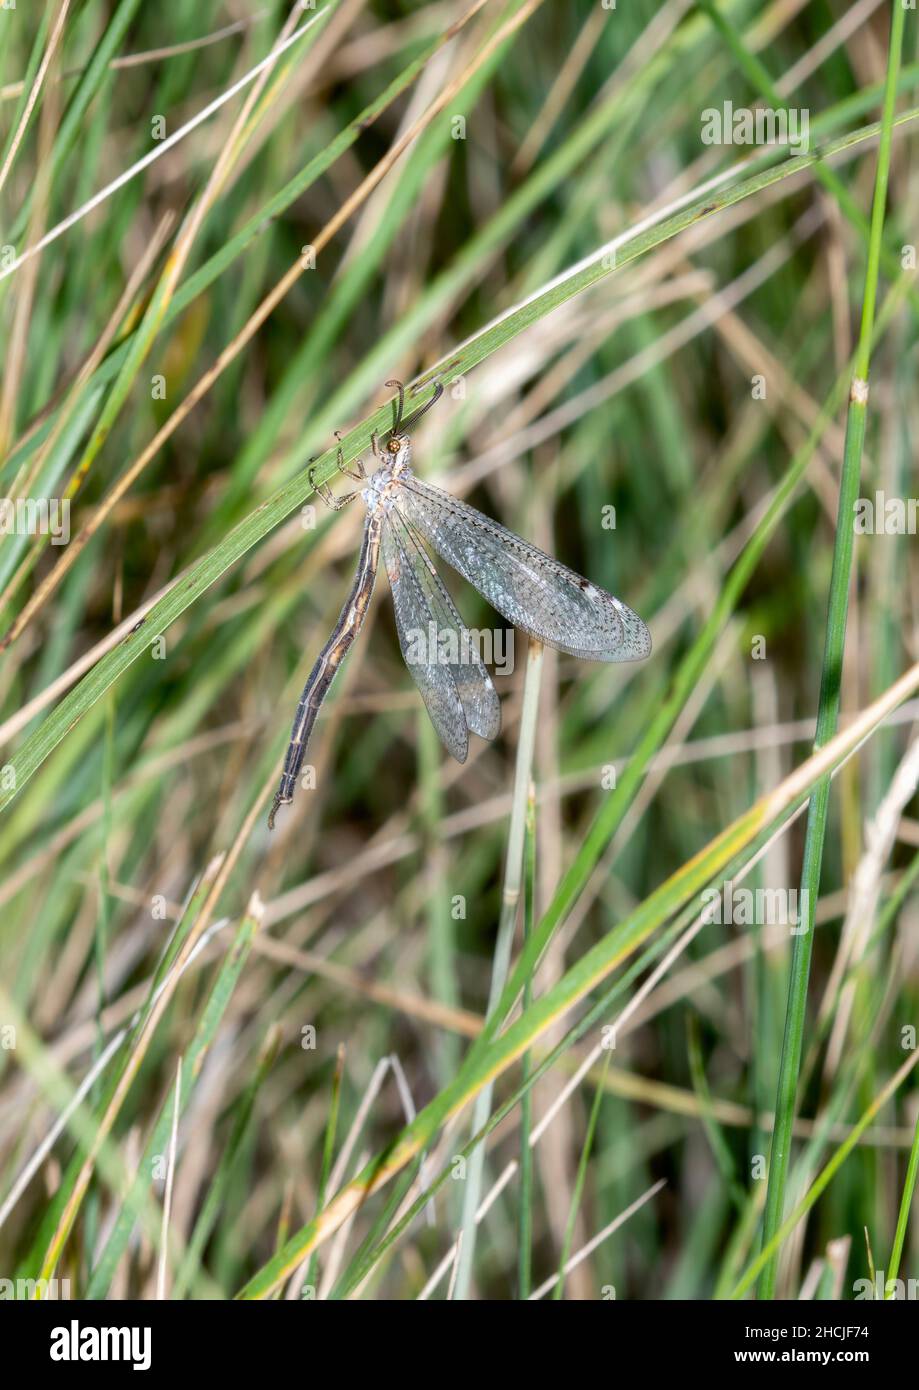 A Huge Antlion Insect in the Genus Brachynemurus Clings to a Blade of Grass in Eastern Colorado Stock Photo